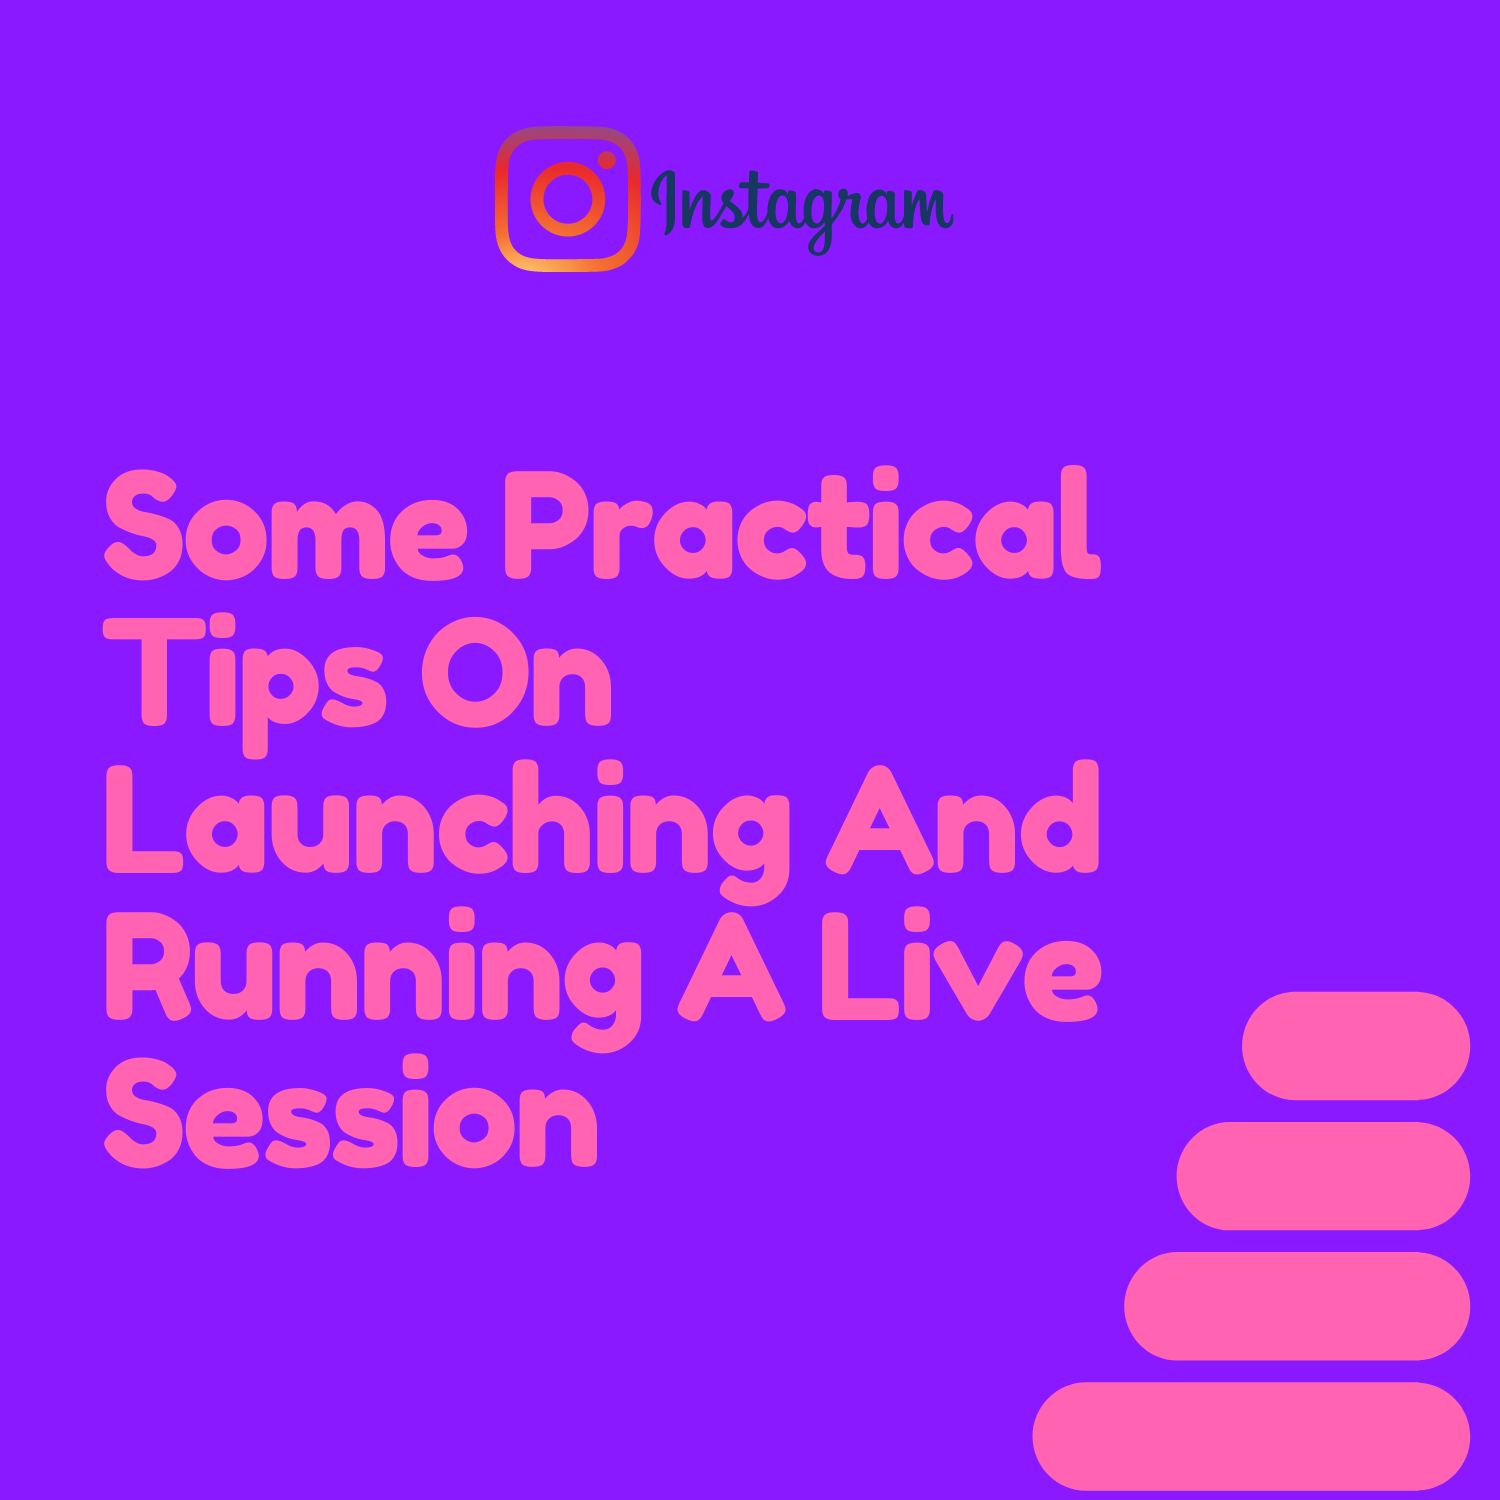 Some Practical Tips On Launching And Running A Live Session